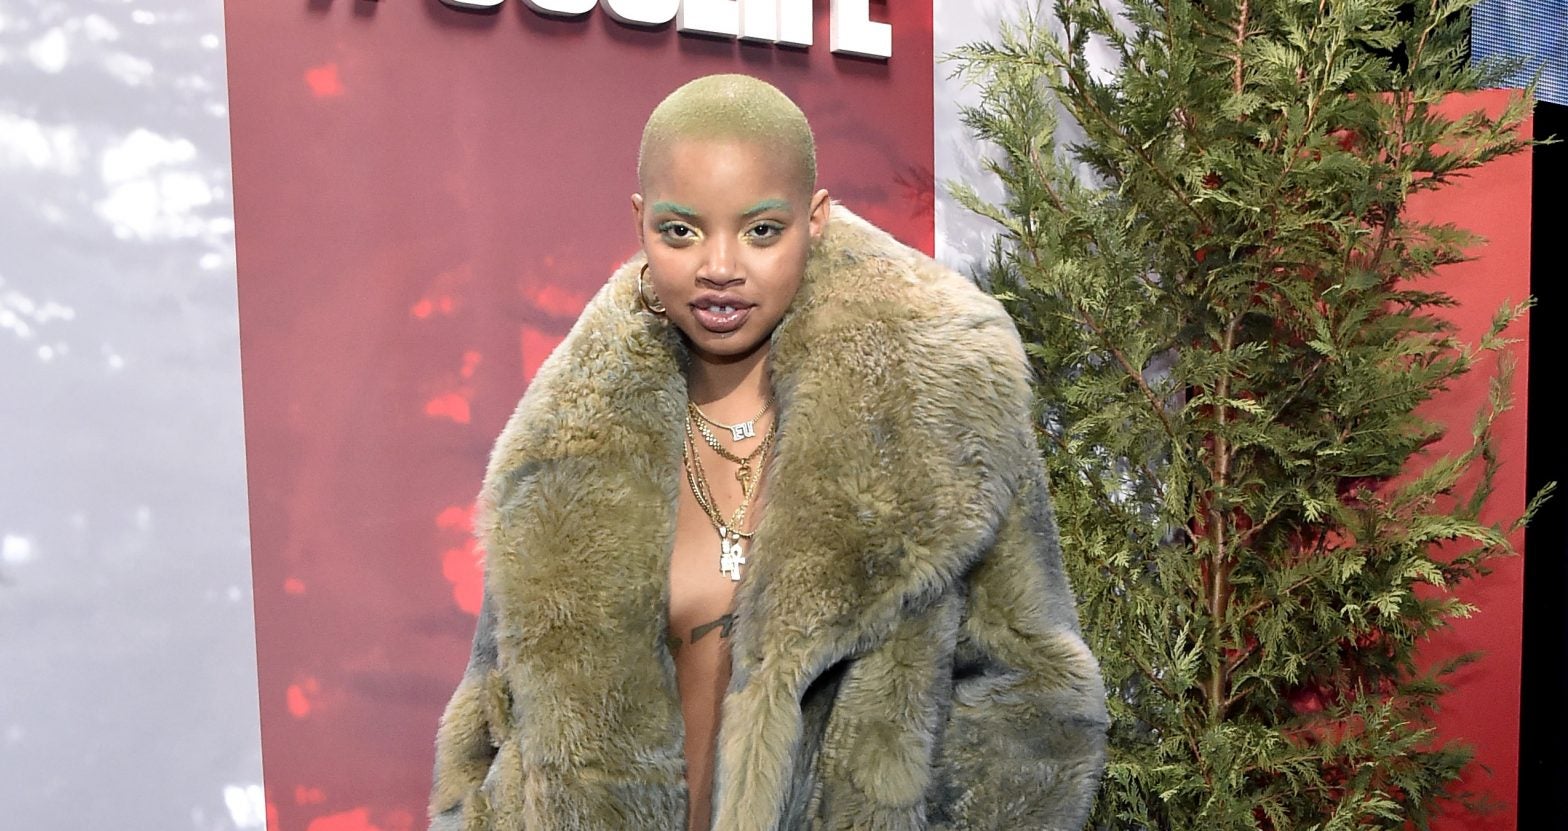 Model-Actress Slick Woods Is All Smiles After Suffering 'Unexpected Seizure'